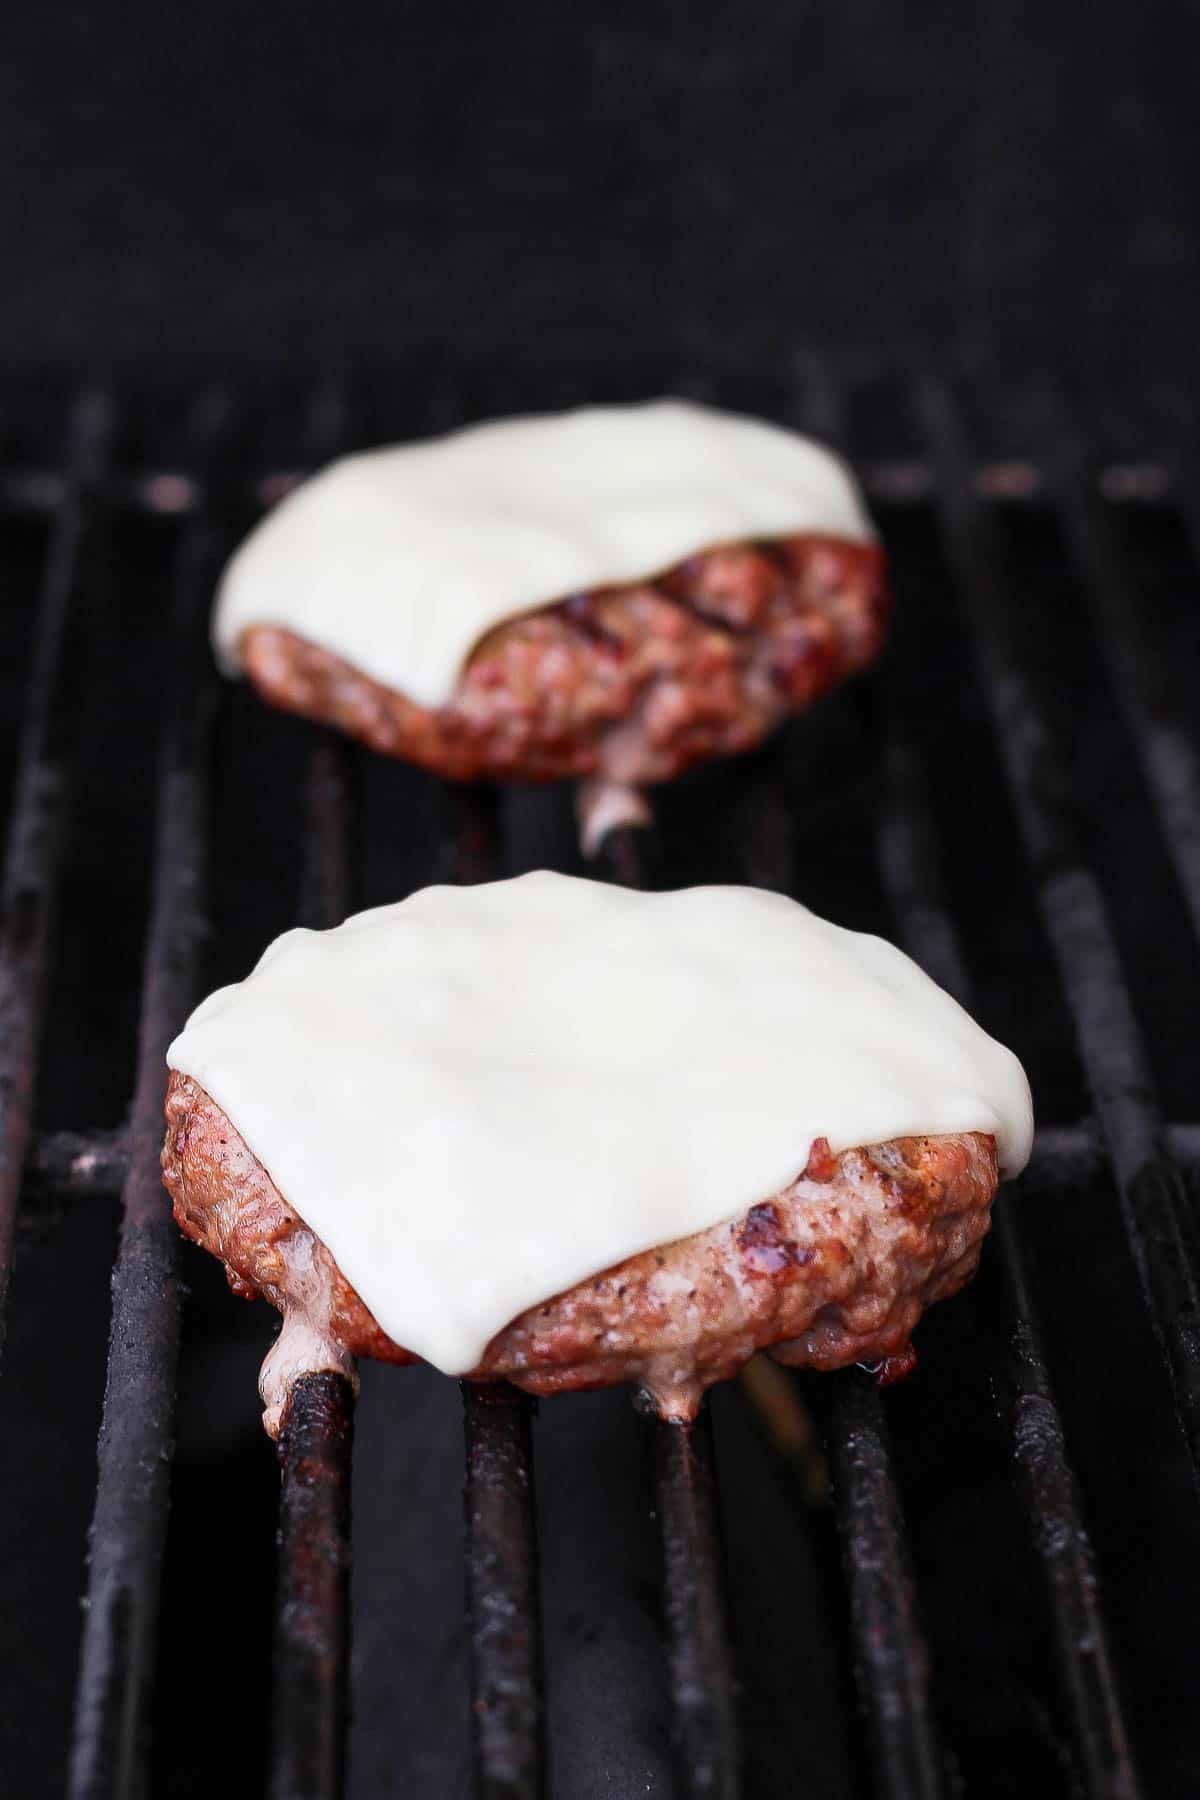 Pork burgers with cheese added on the grill.